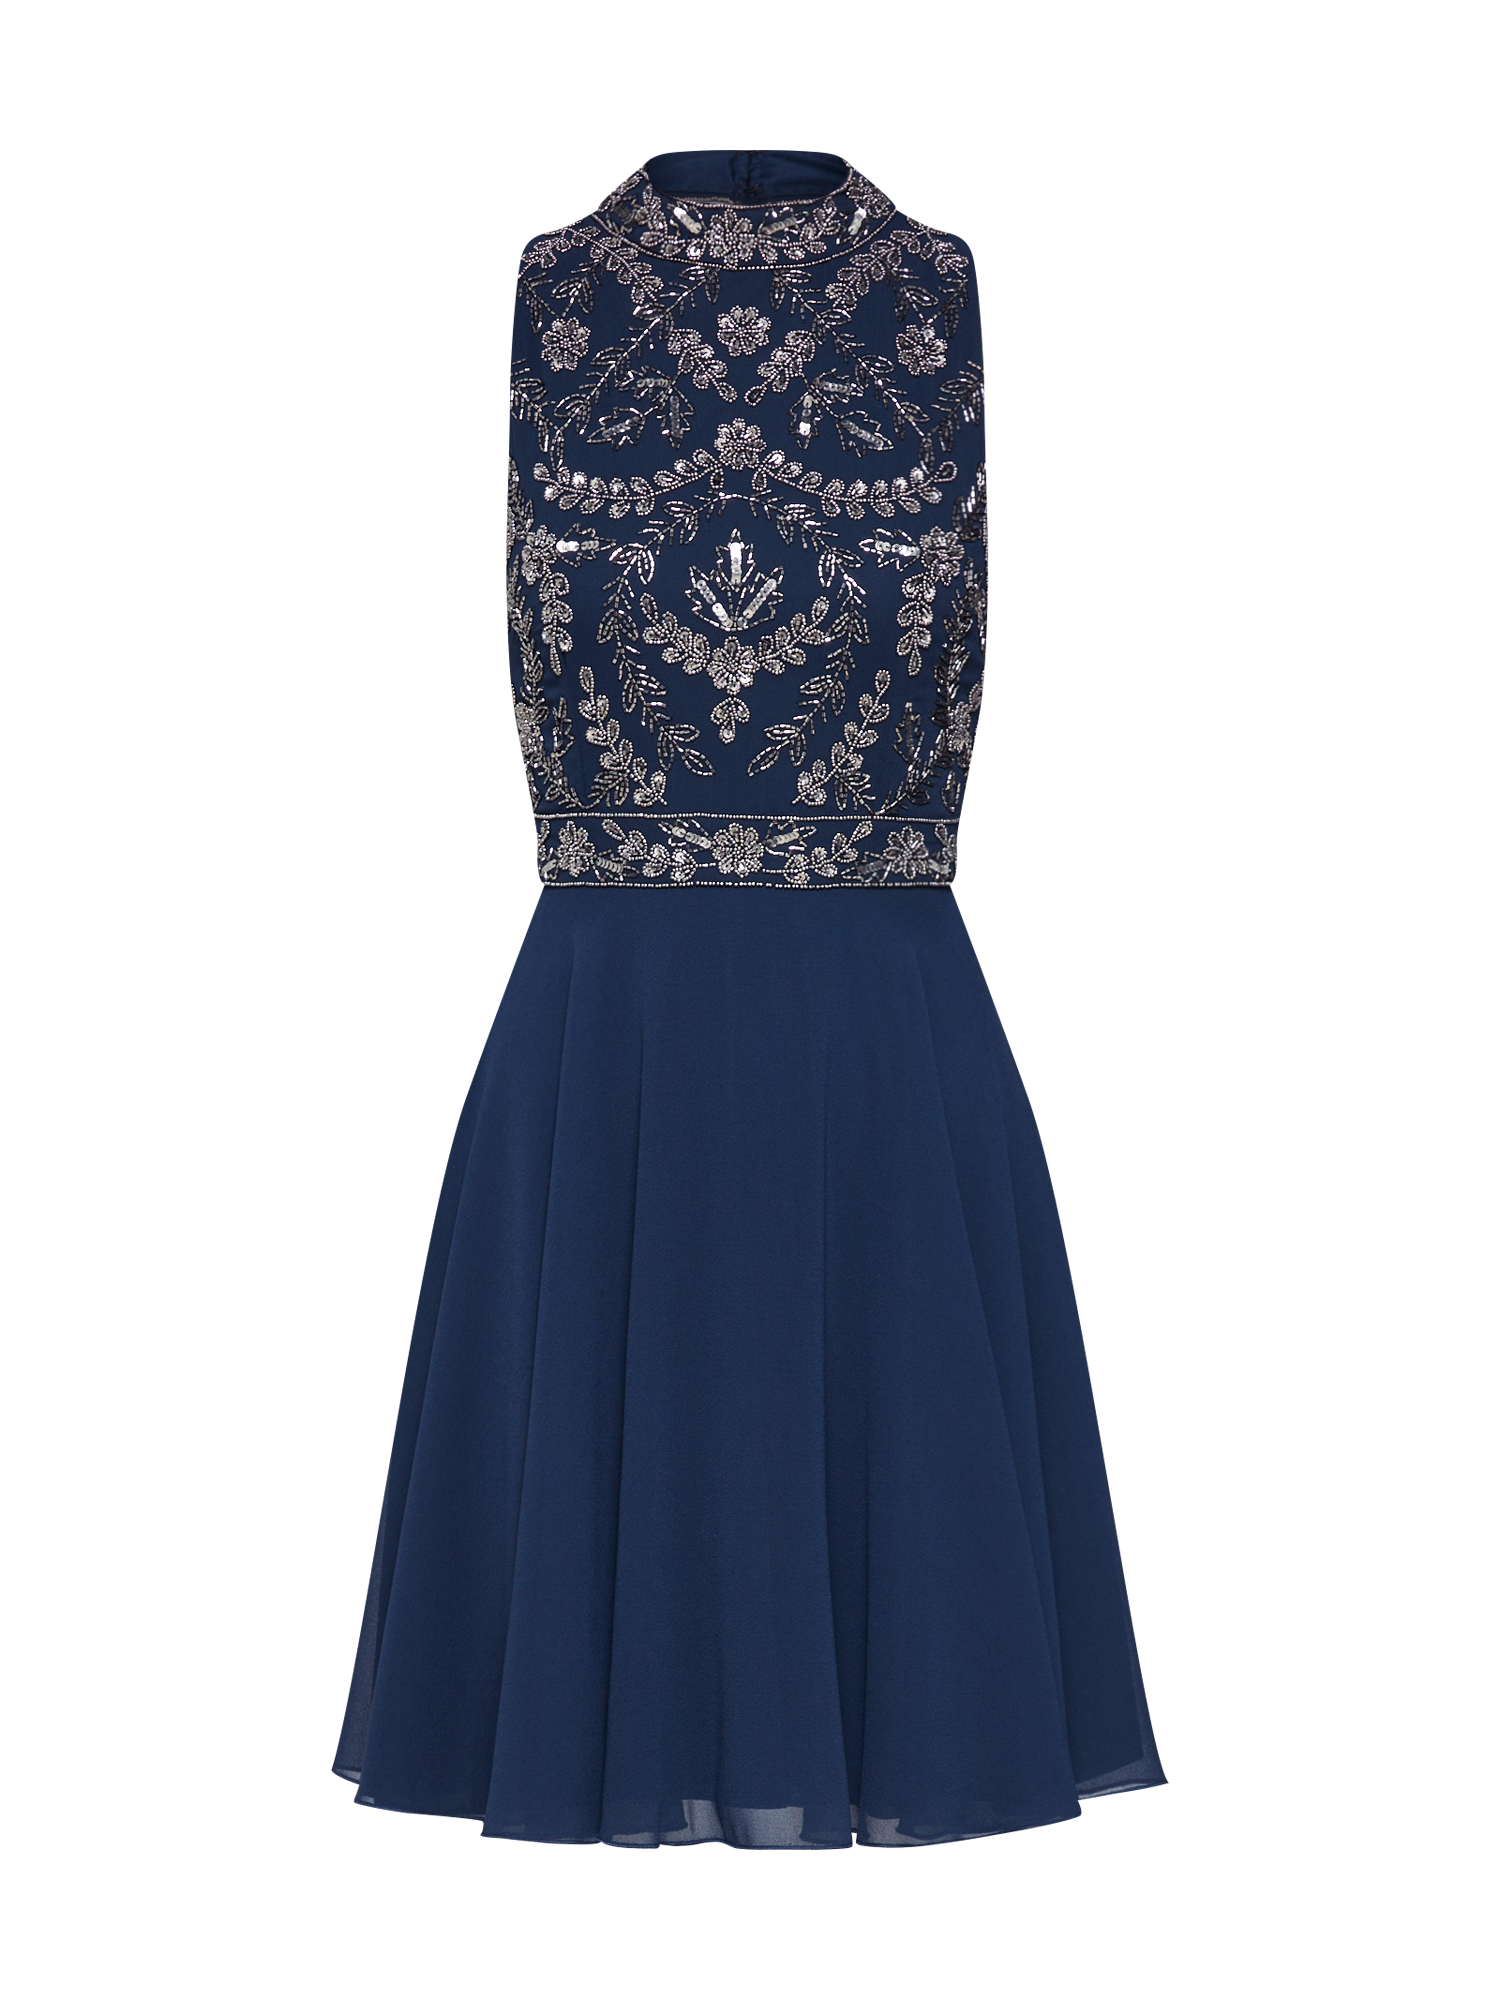 Donna AsqSY LACE & BEADS Abito da cocktail in Navy 